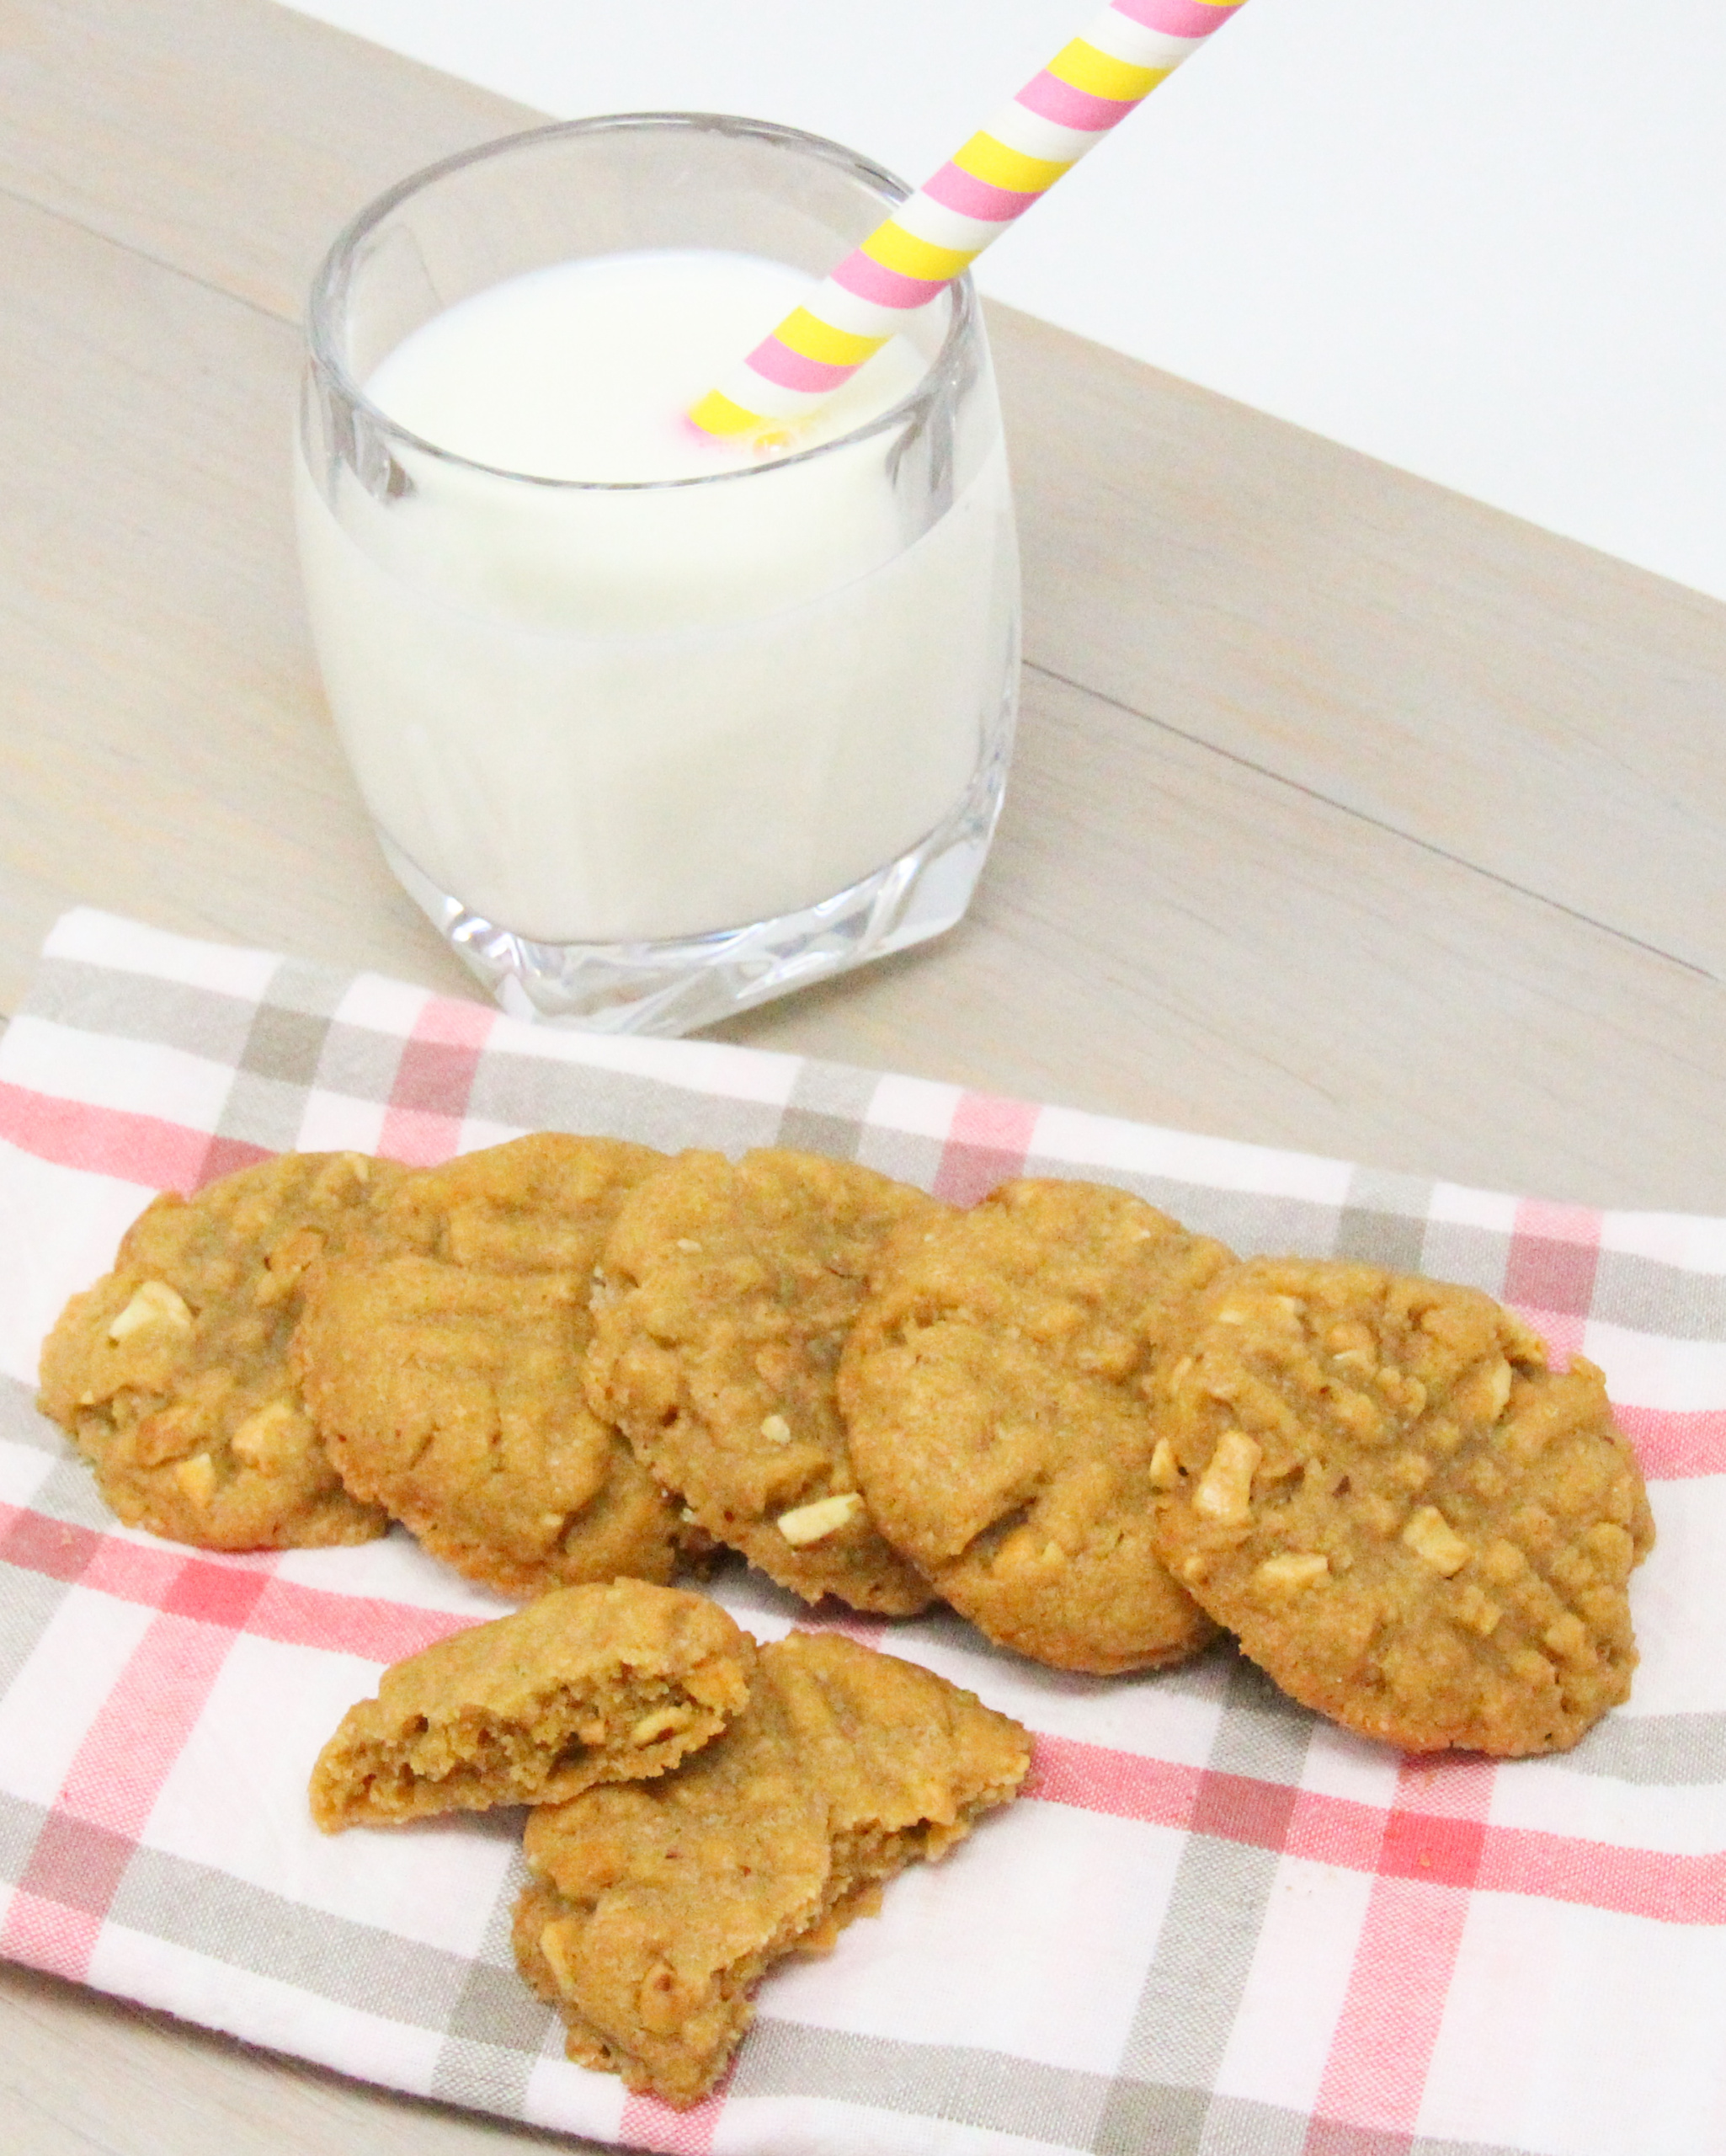 Using only four ingredients and NO flour, these easy peanut butter cookies are naturally gluten-free and are crispy on the edges and chewy on the insides. Recipe shared with permission granted by Valerie Burns, author of MURDER IS A PIECE OF CAKE. 